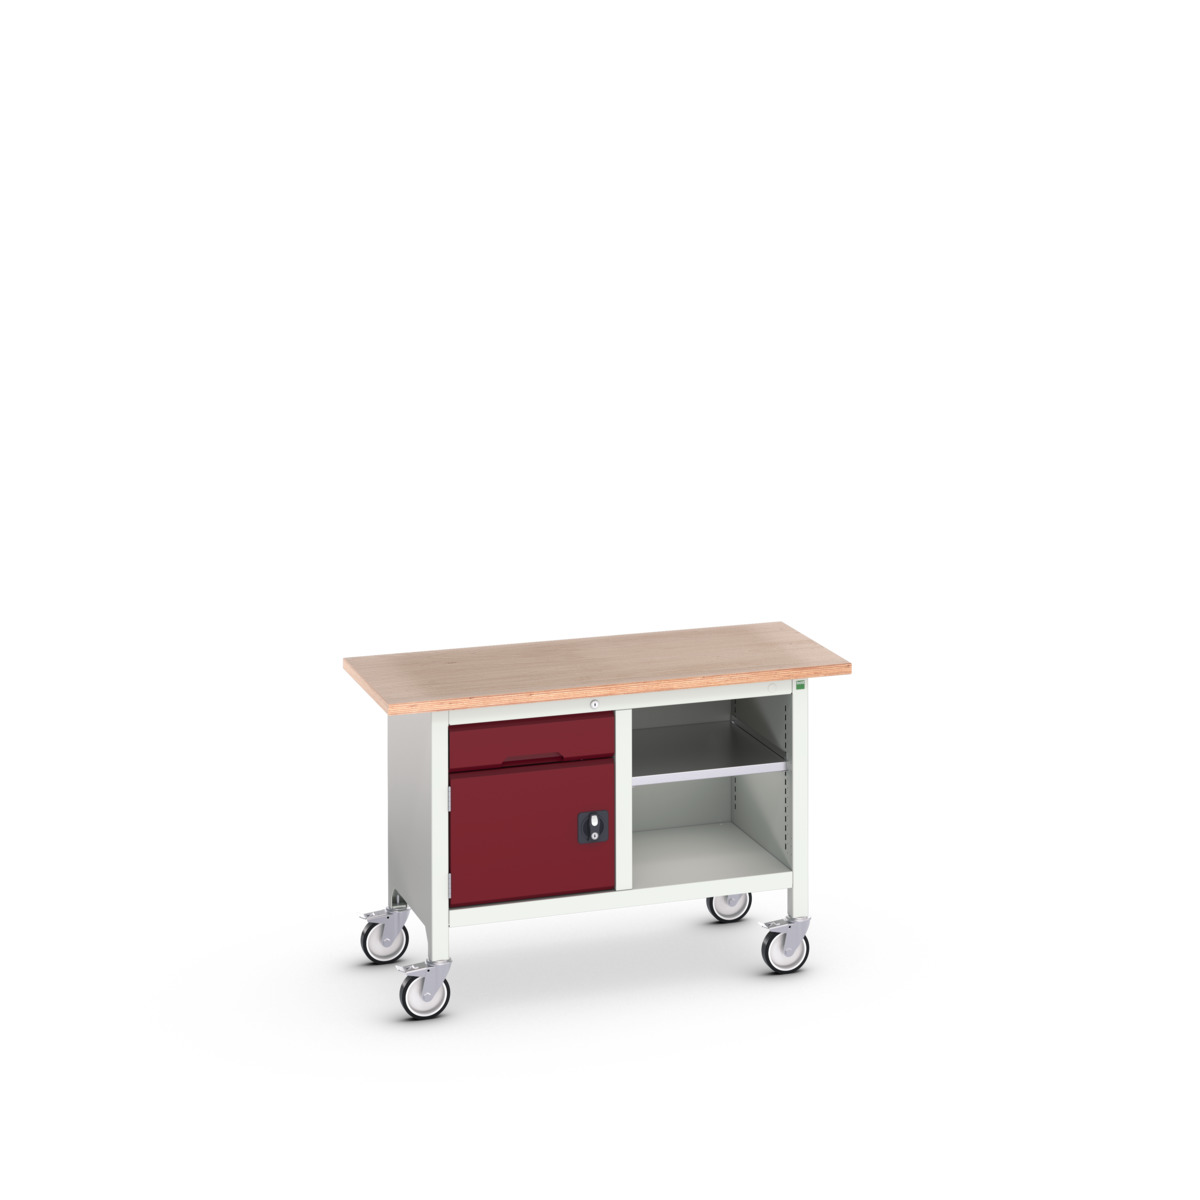 16923200.24 - verso mobile storage bench (mpx)